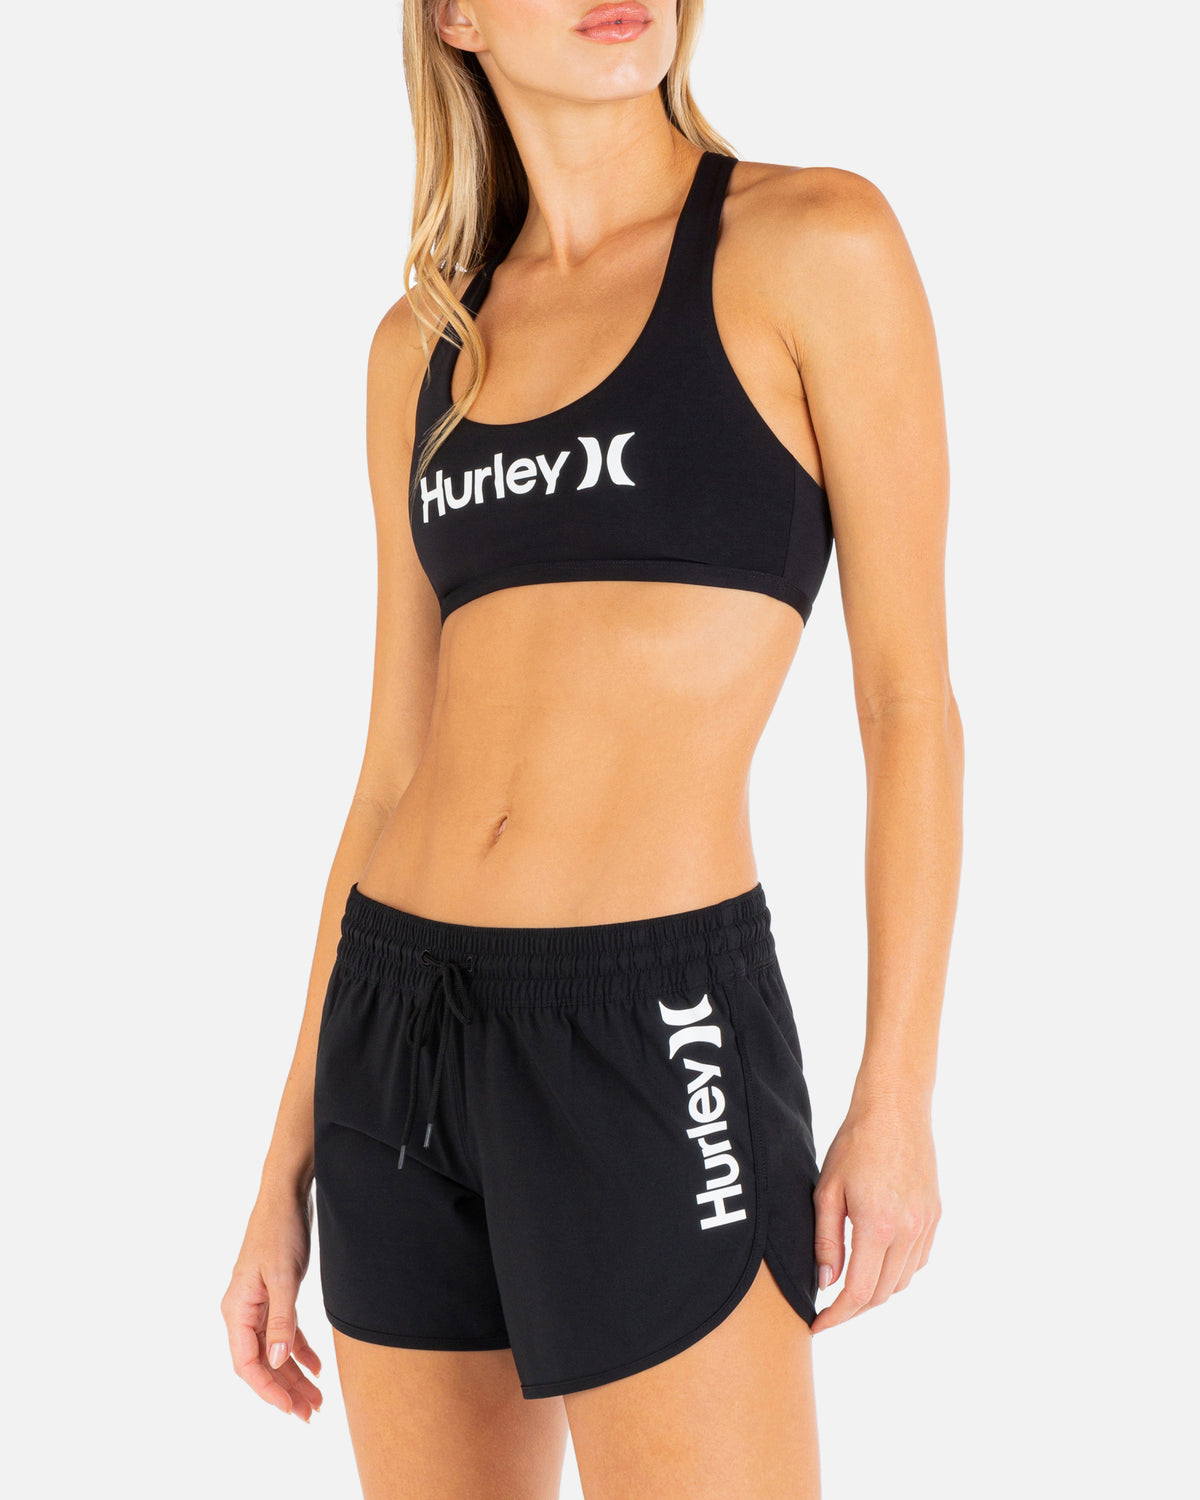 Hurley – Activewear – V&A Waterfront